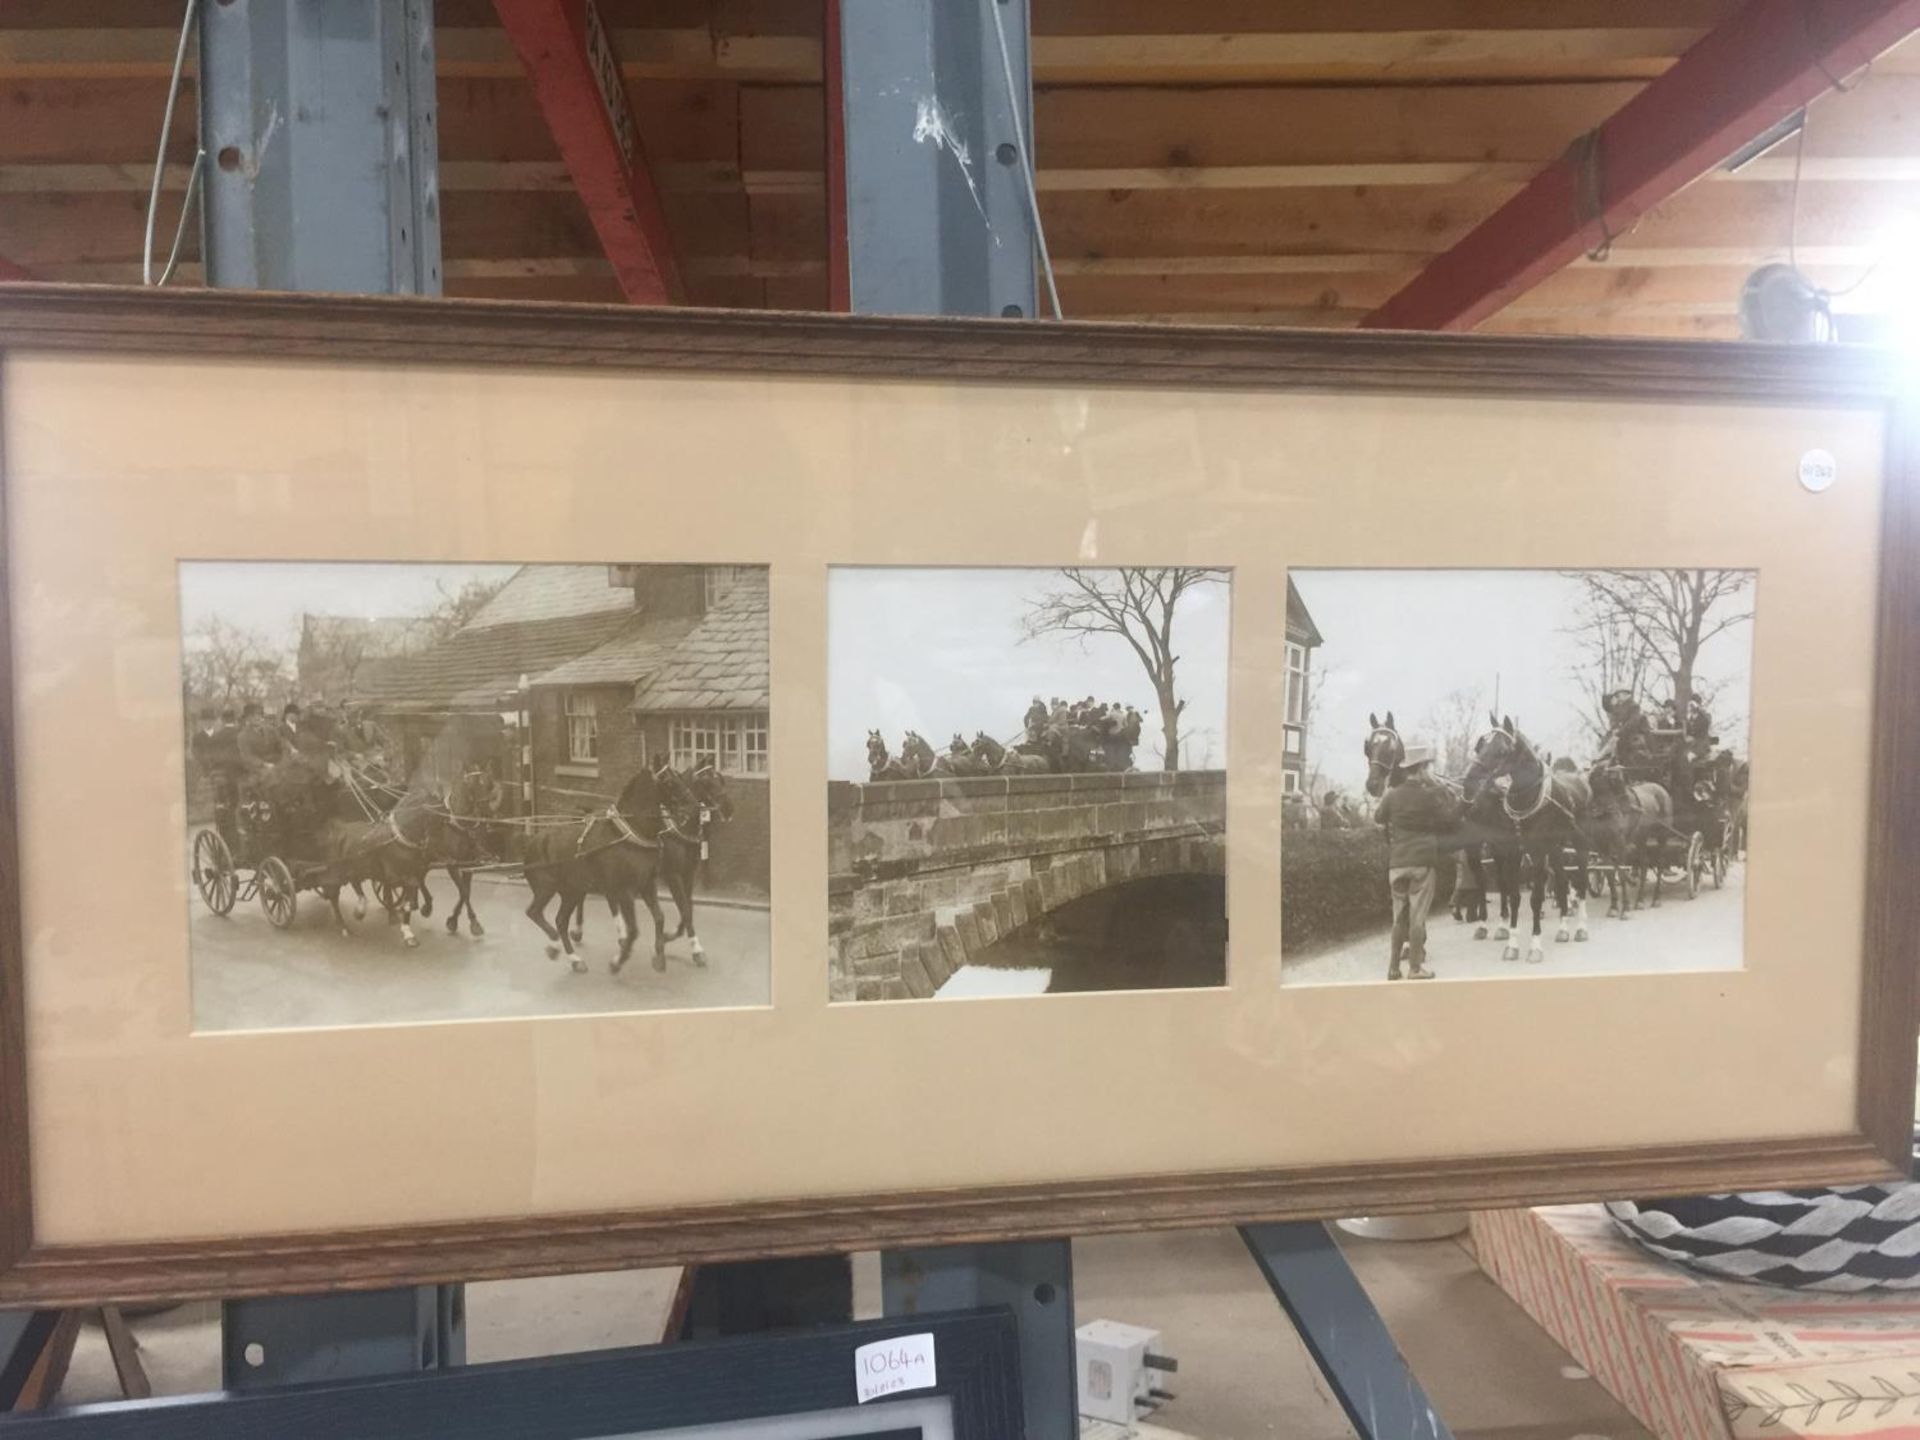 A FRAMED SEPIA STYLE PICTURE OF A CARRIAGE AND FOUR HORSES PLUS A FRAMED MONTAGE OF EVENTING AND - Image 3 of 3